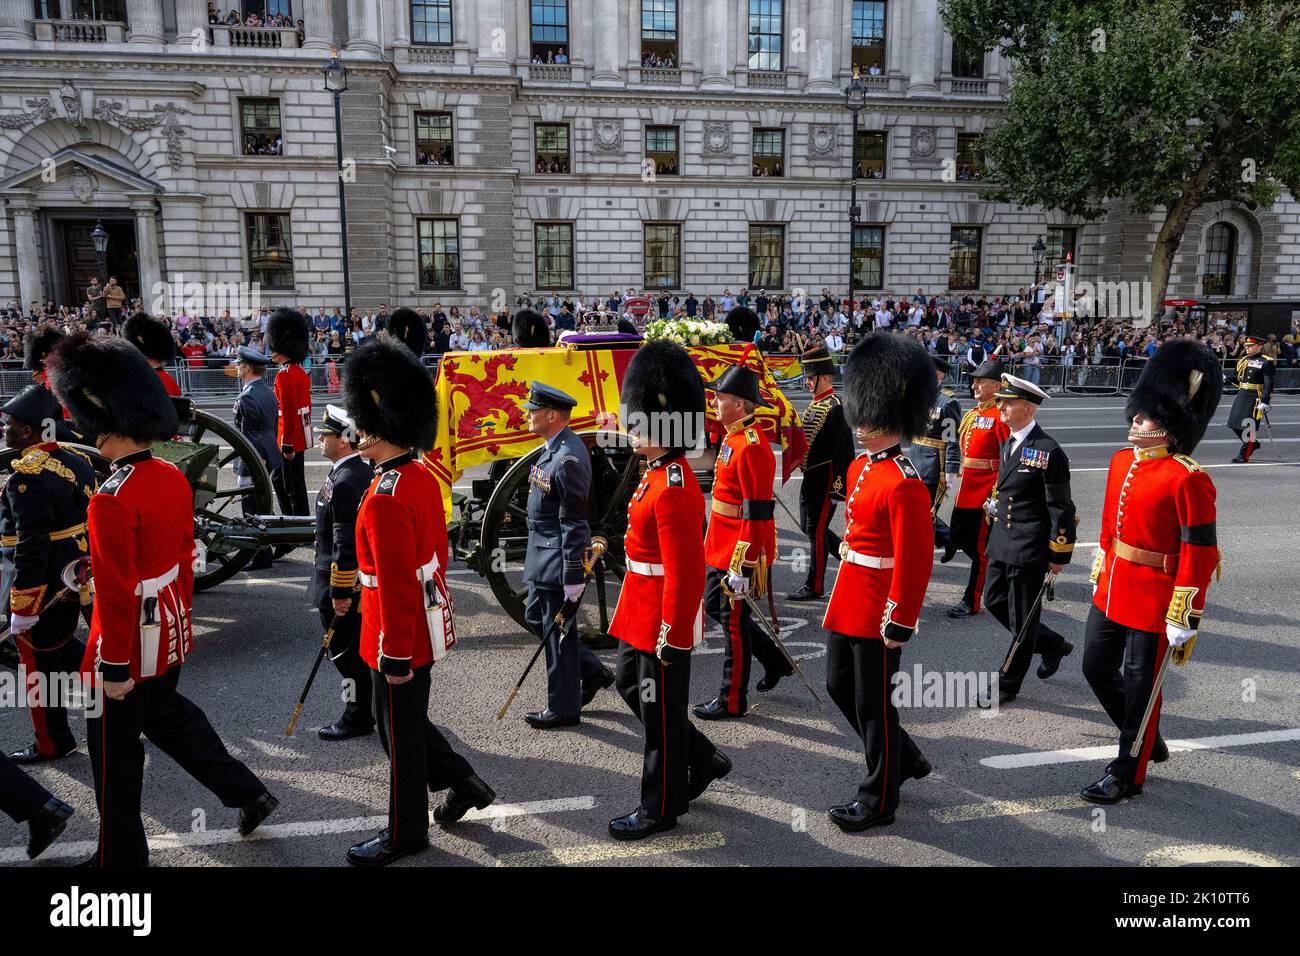 Queen Elizabeth II's coffin is taken in procession Buckingham Palace to Westminster Hall after her death on 8th September 2022. Stock Photo